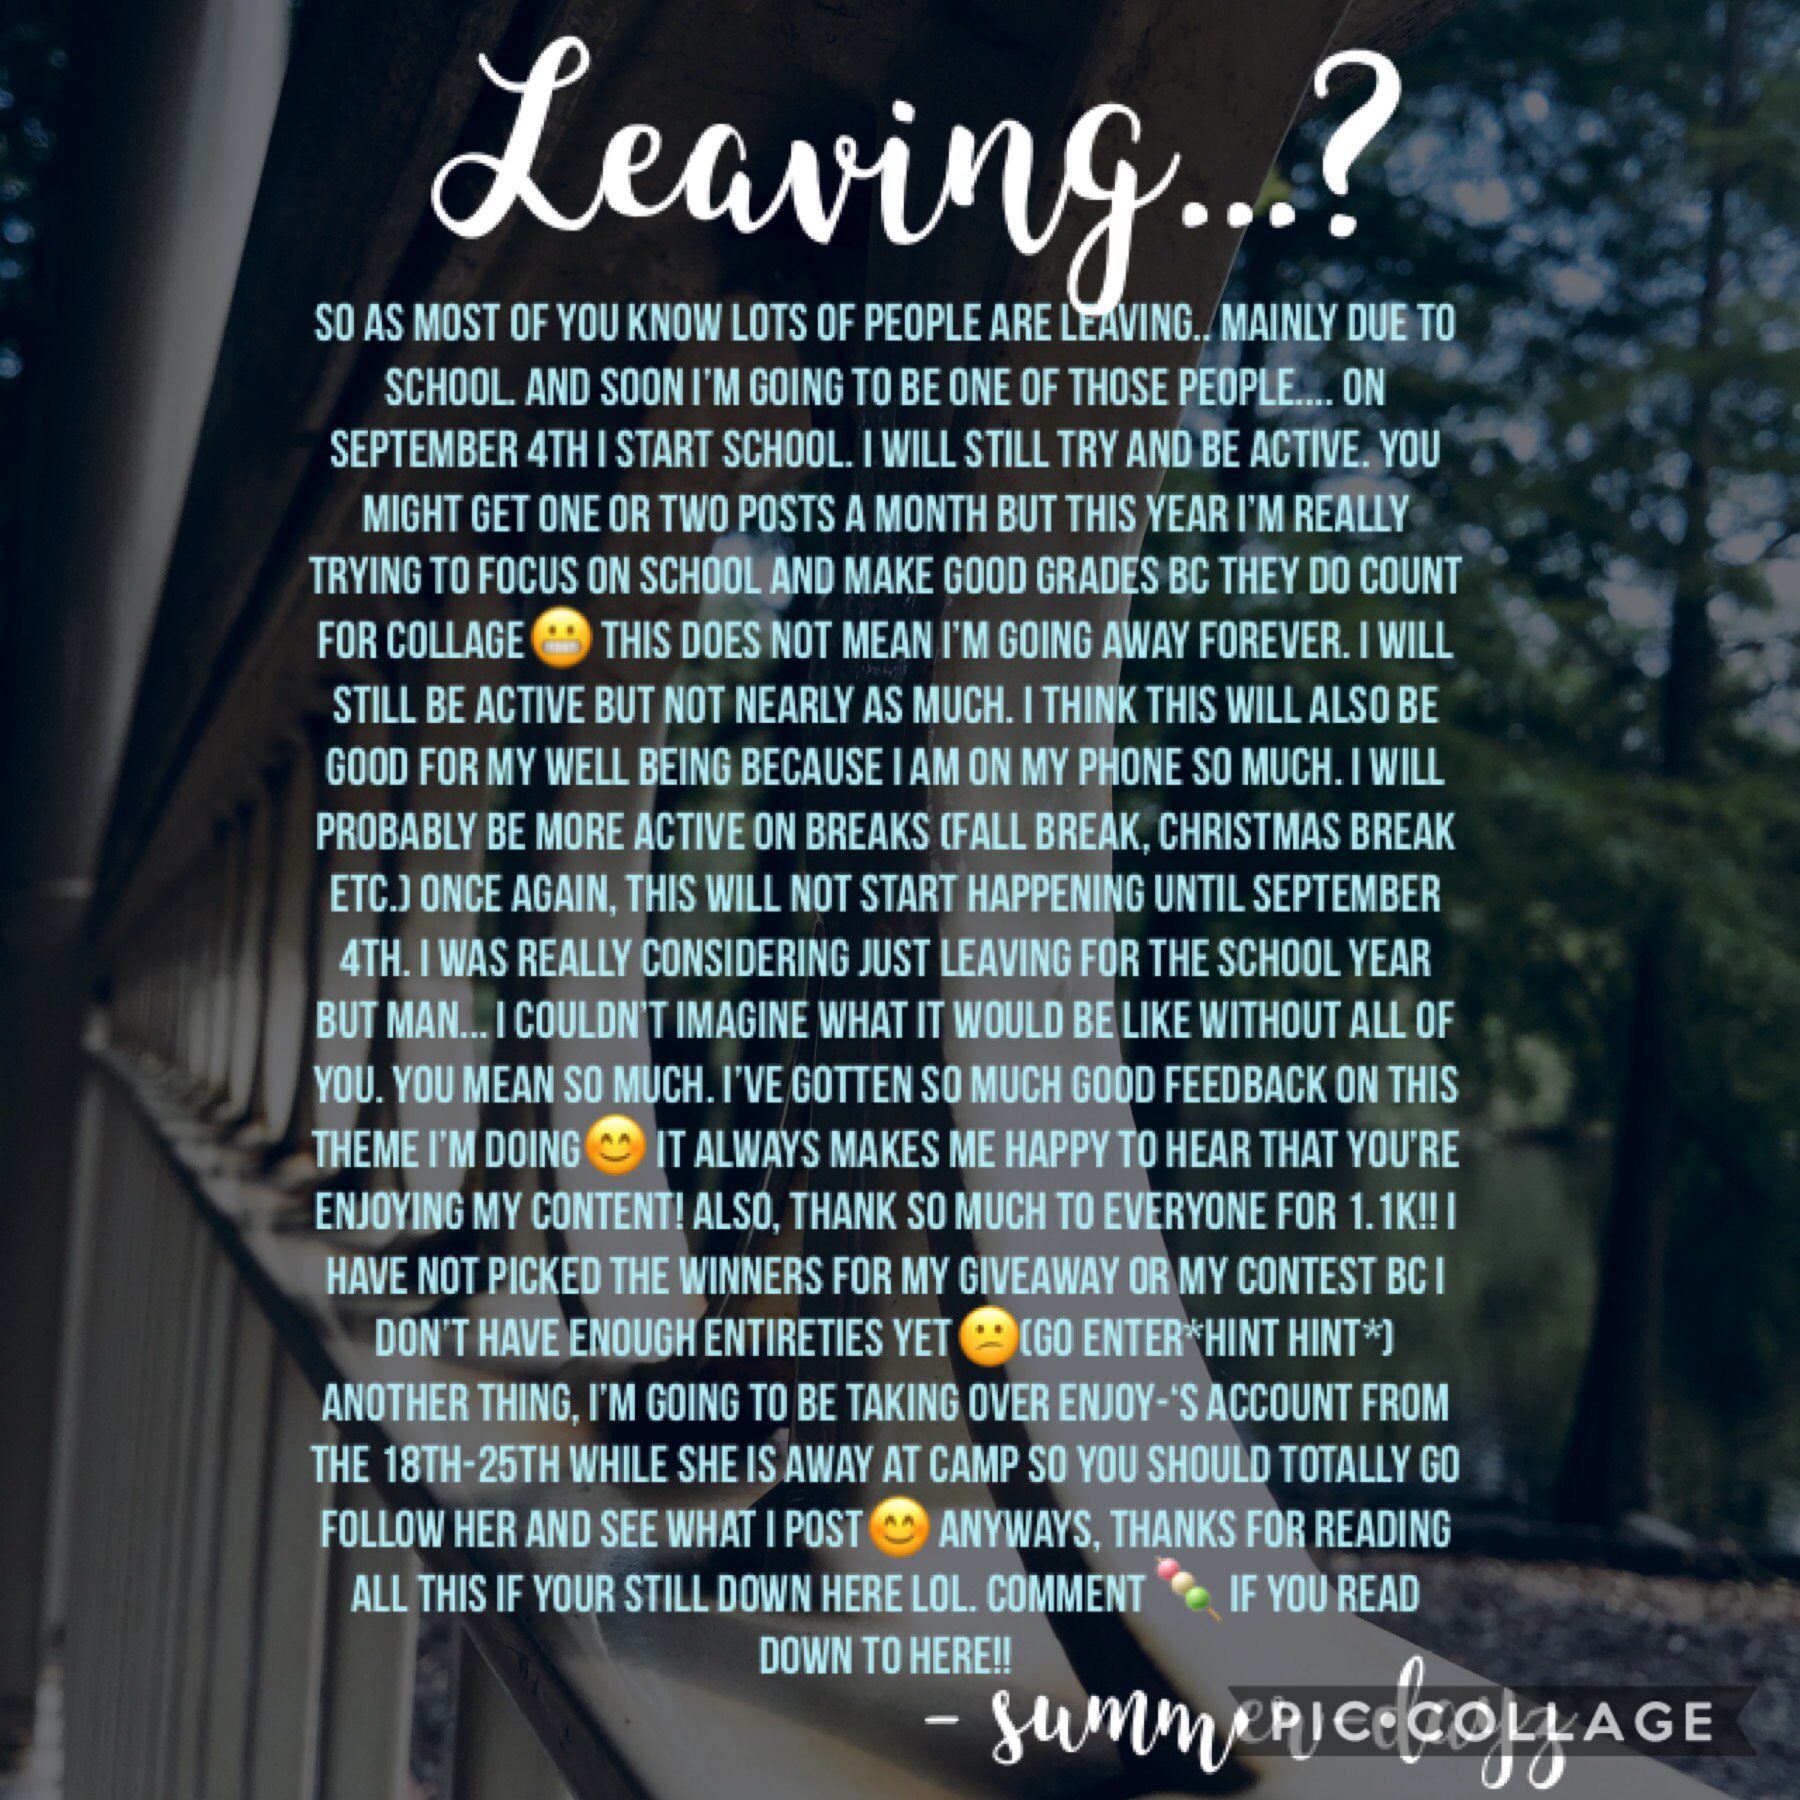 Tap😔
No I’m not permanently leaving. Read if you would like to know. I’ll still be active as usual until September 4th! Don’t forget to go follow @Enjoy- for some posts from me this week!!😊